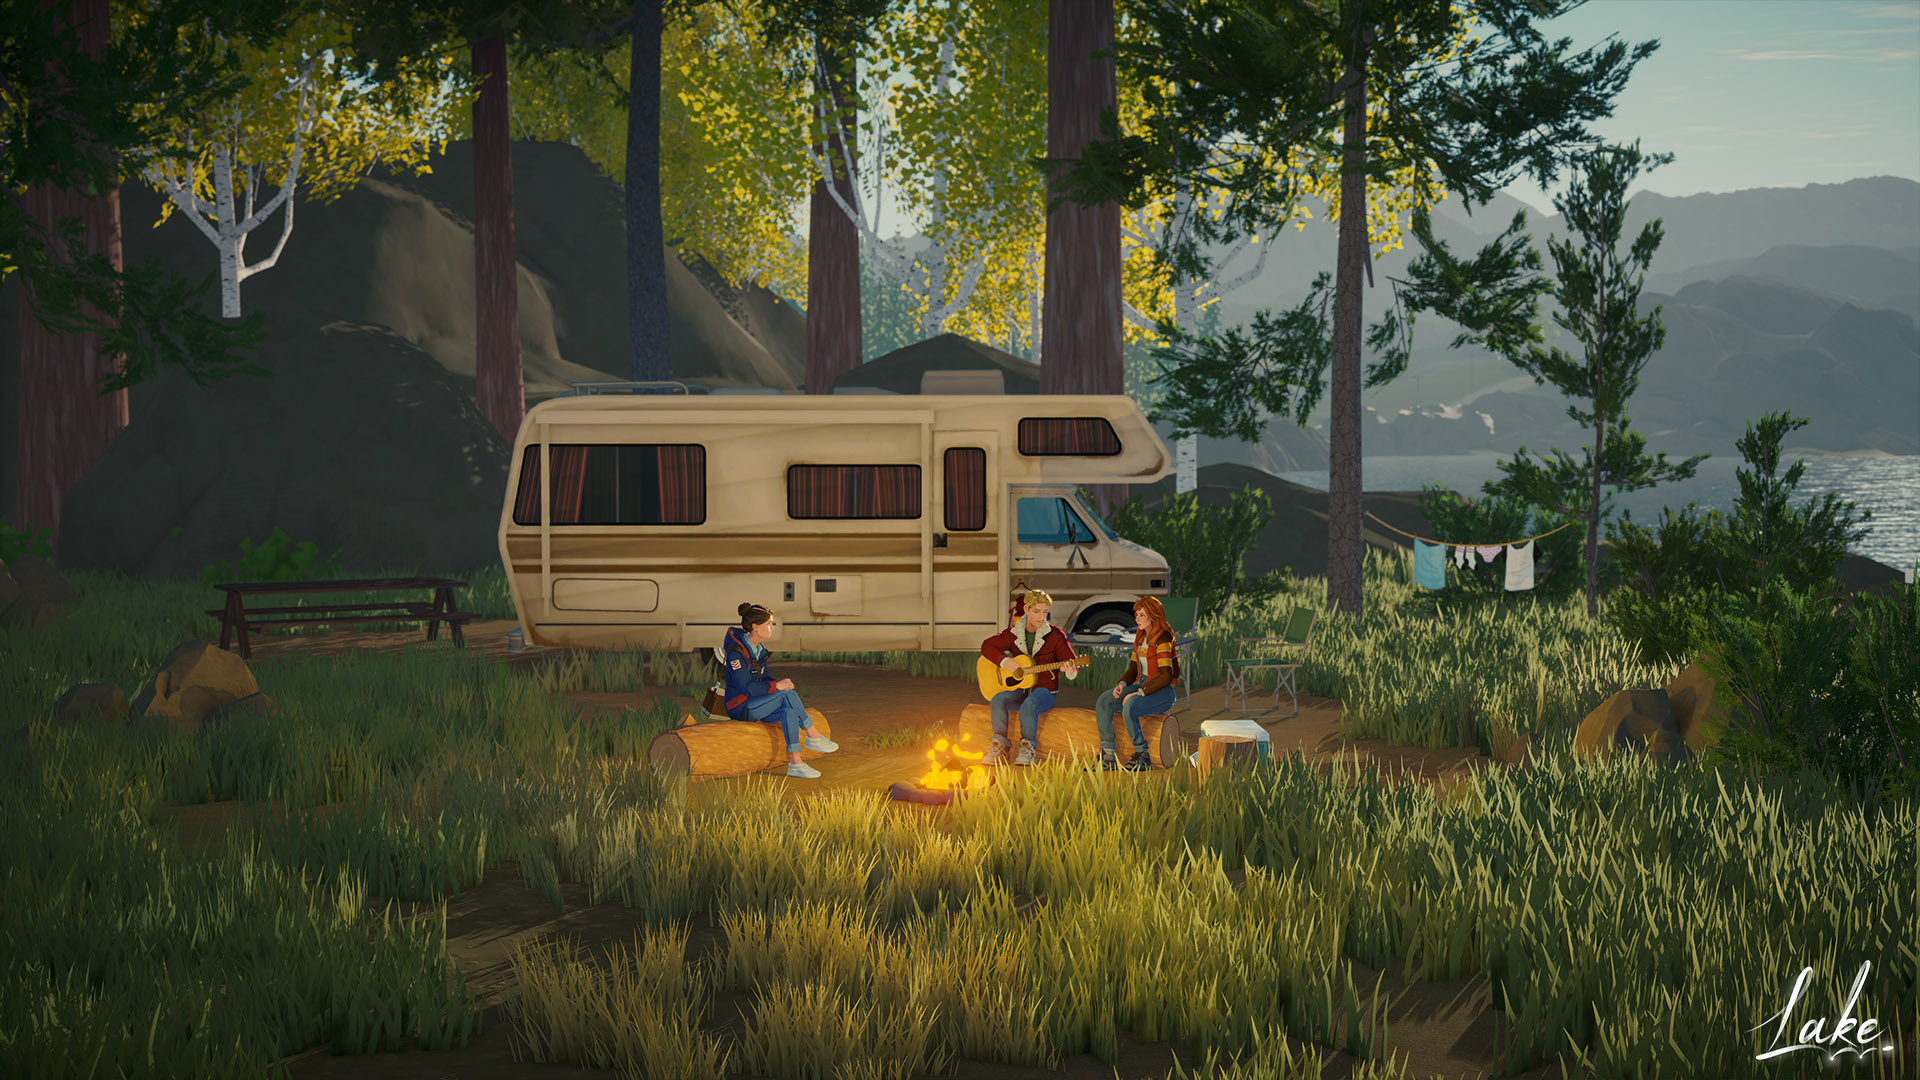 In a forest next to a lake, a group of three friends are sitting next to a campfire, in front of a camping car. One of them is playing guitar while the other two listen, sitting on wood logs